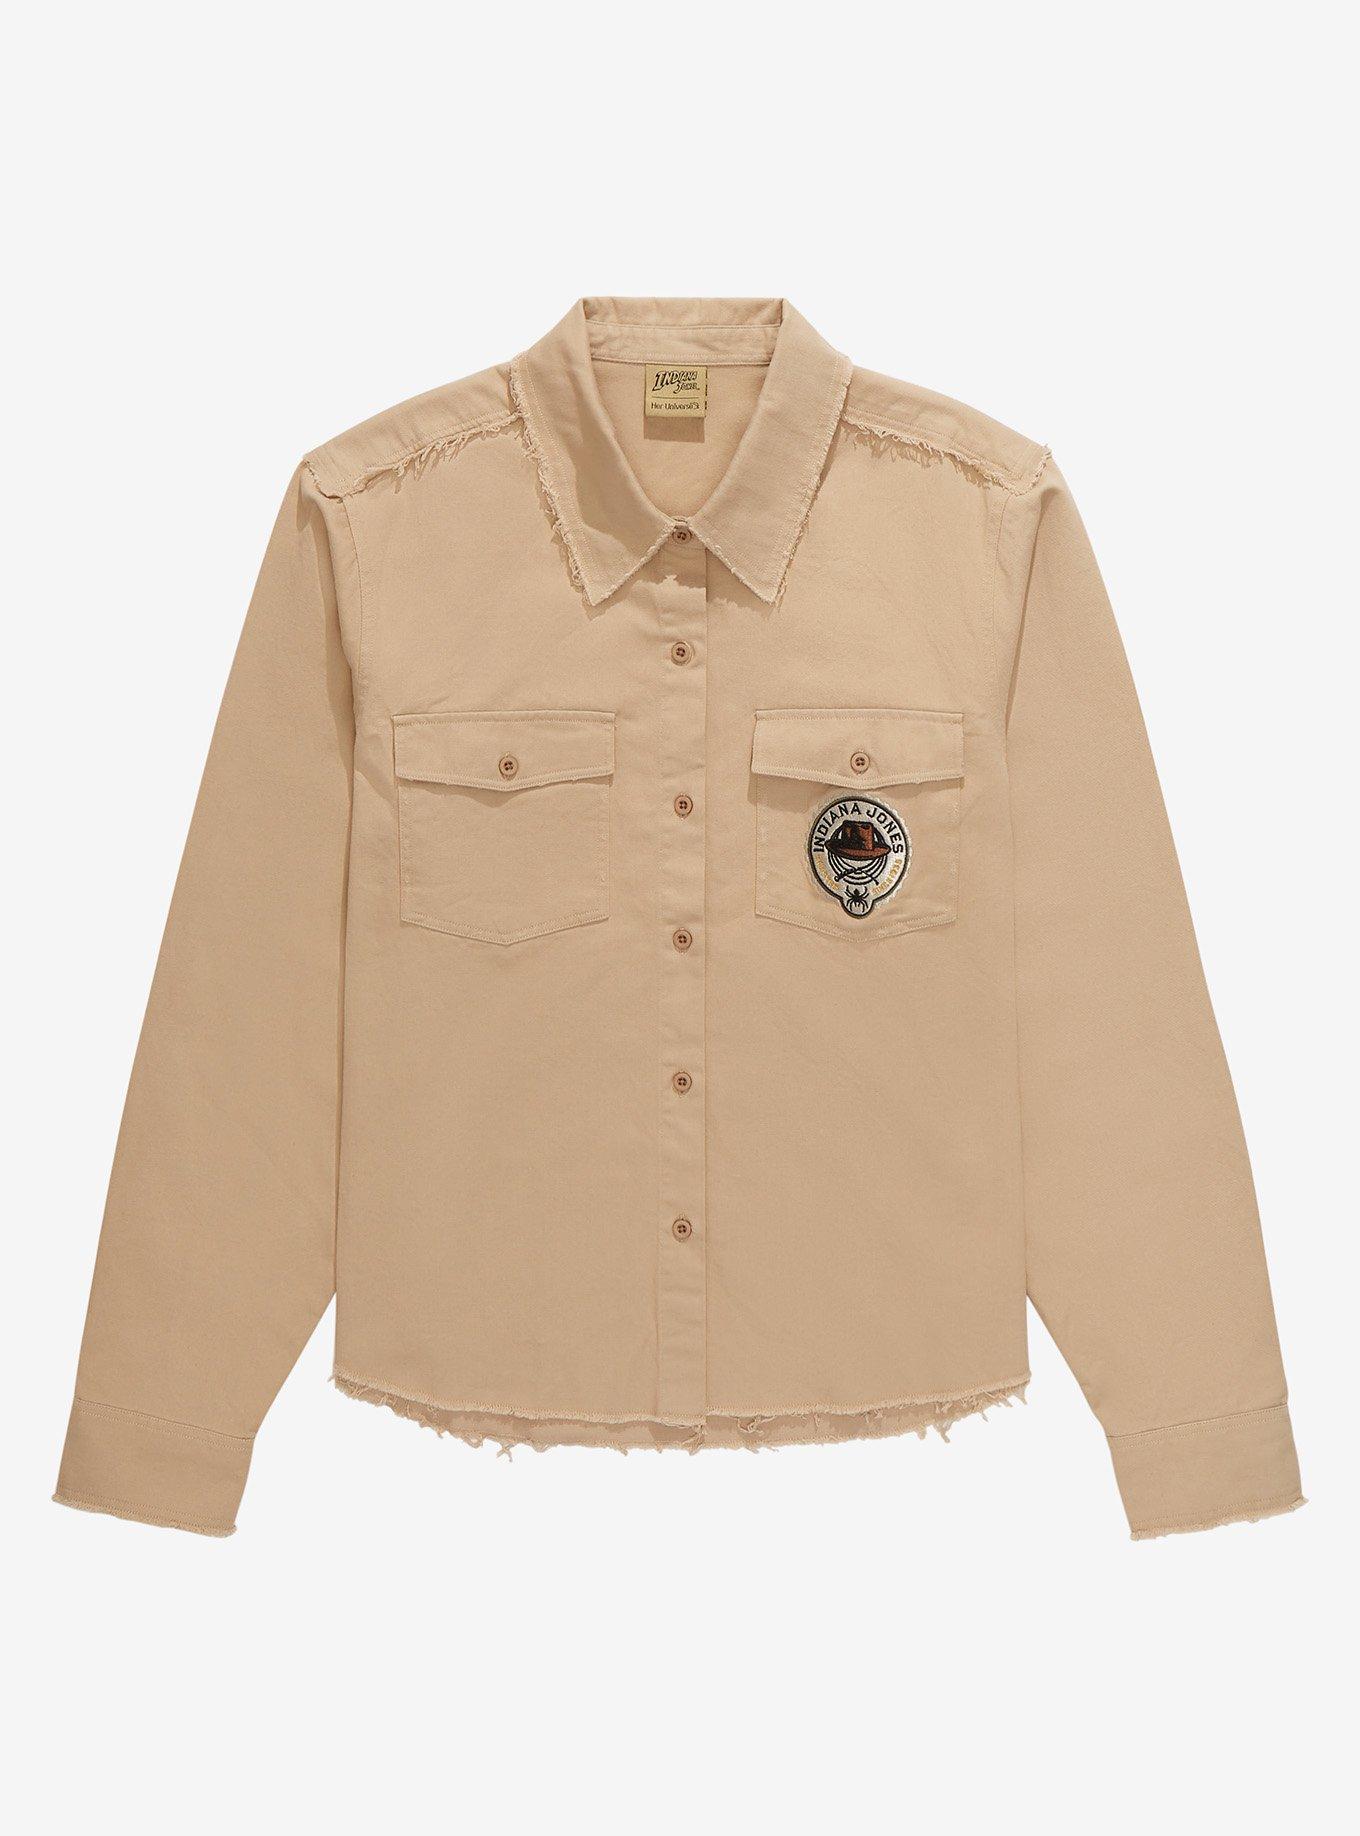 Our Universe Indiana Jones Patch Utility Overshirt - BoxLunch Exclusive, TANBEIGE, hi-res